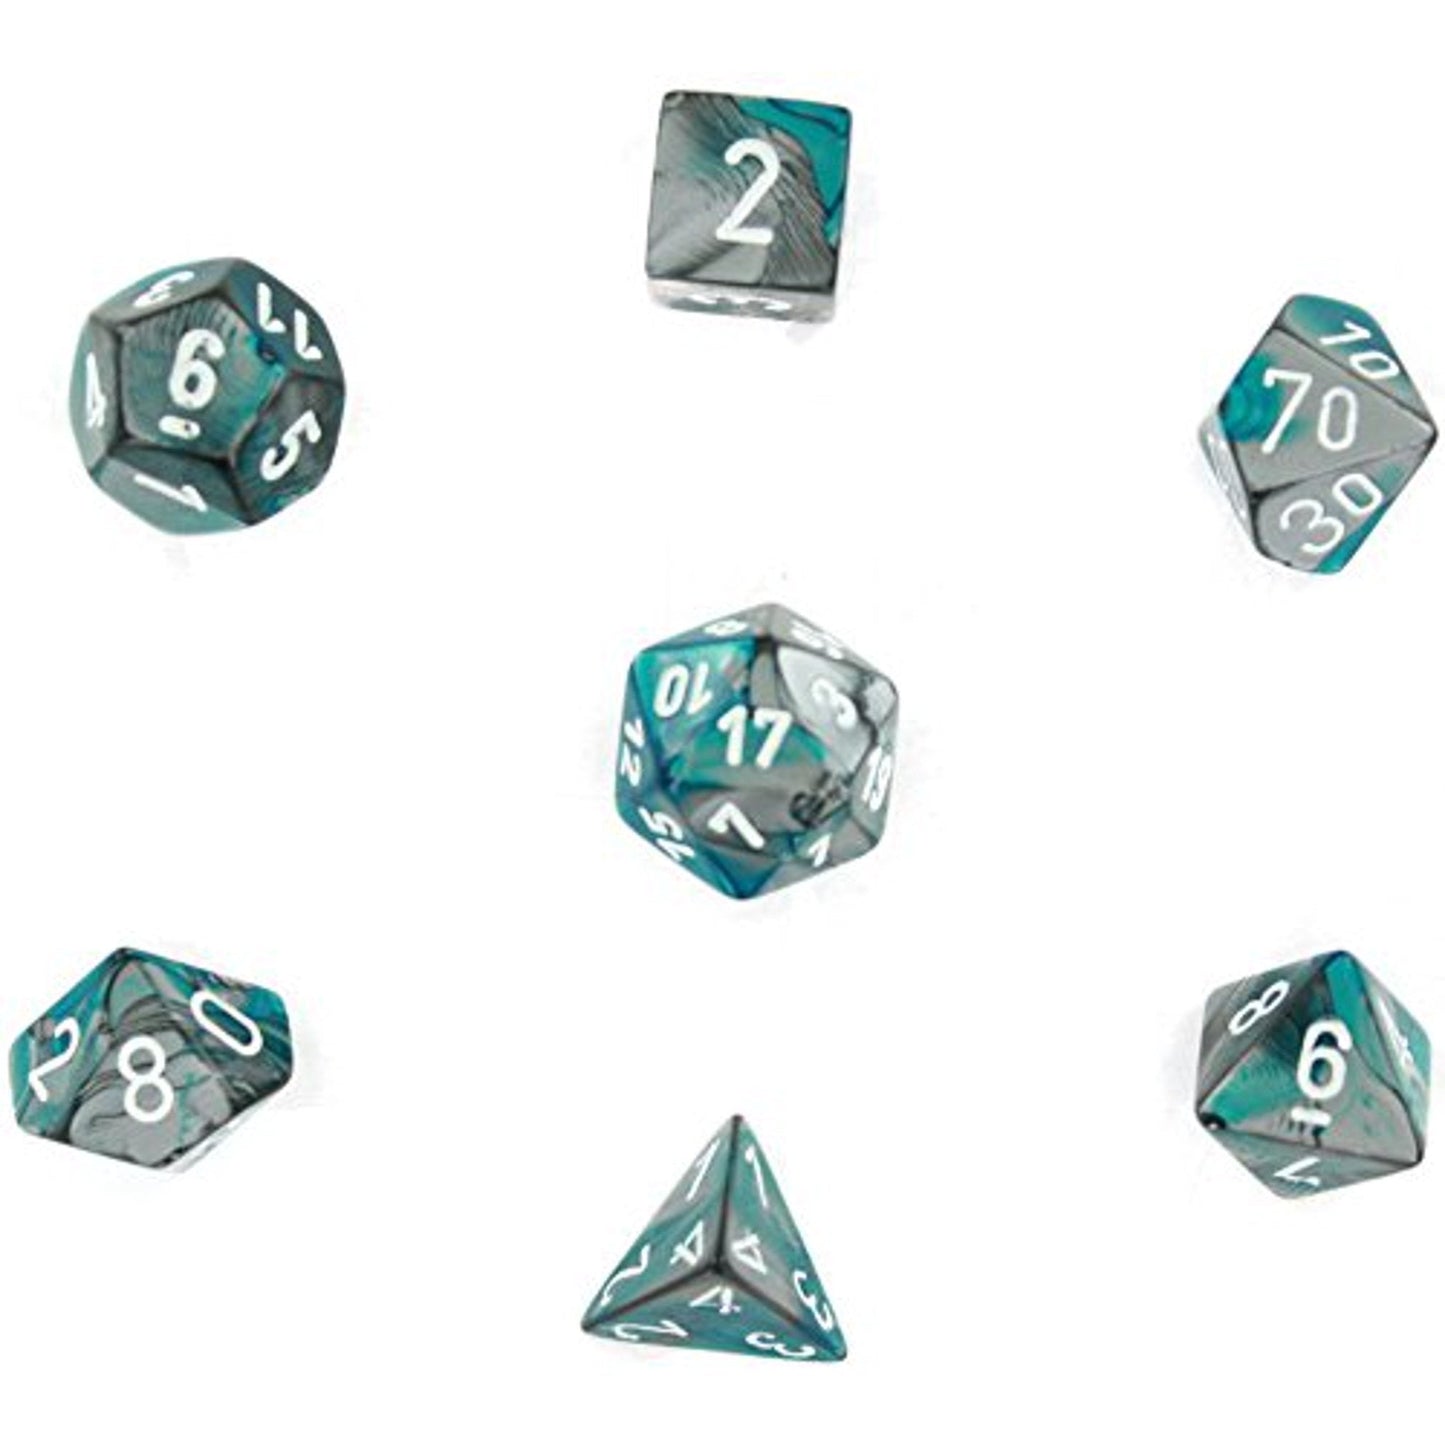 Chessex Dice: 7 Die Set - Gemini - Steel-Teal with White (CHX 26456) - Gamescape